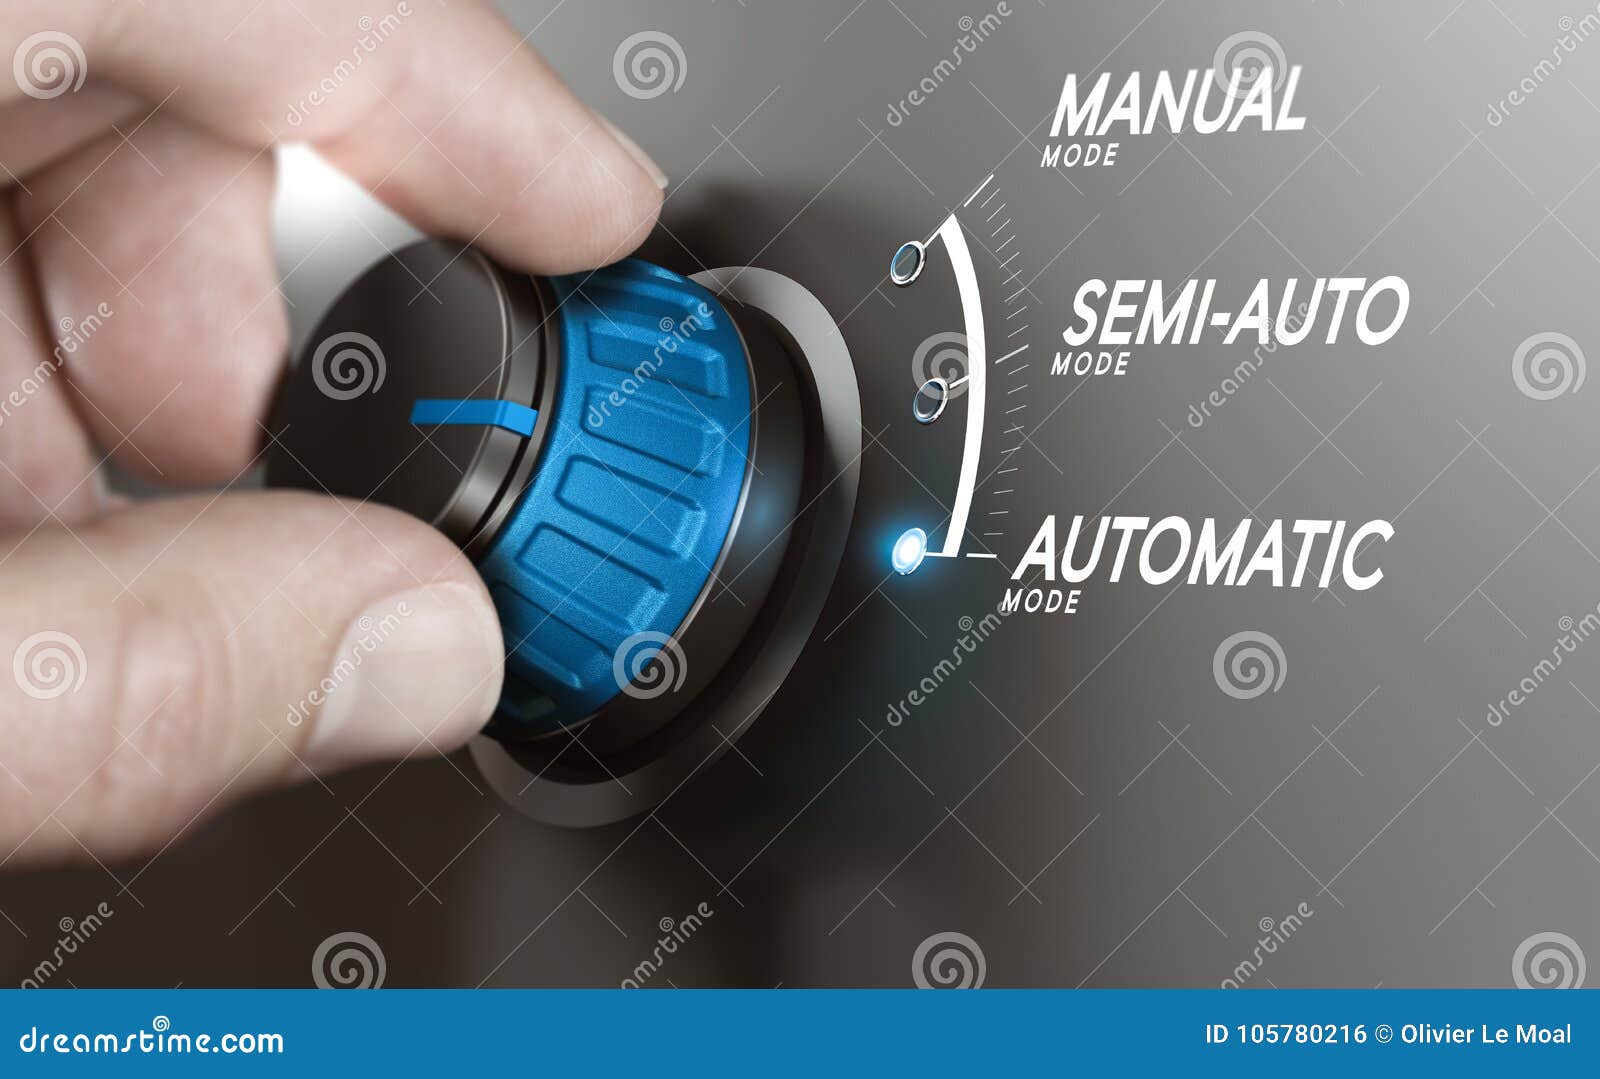 automatic testing or manufacturing processes automation